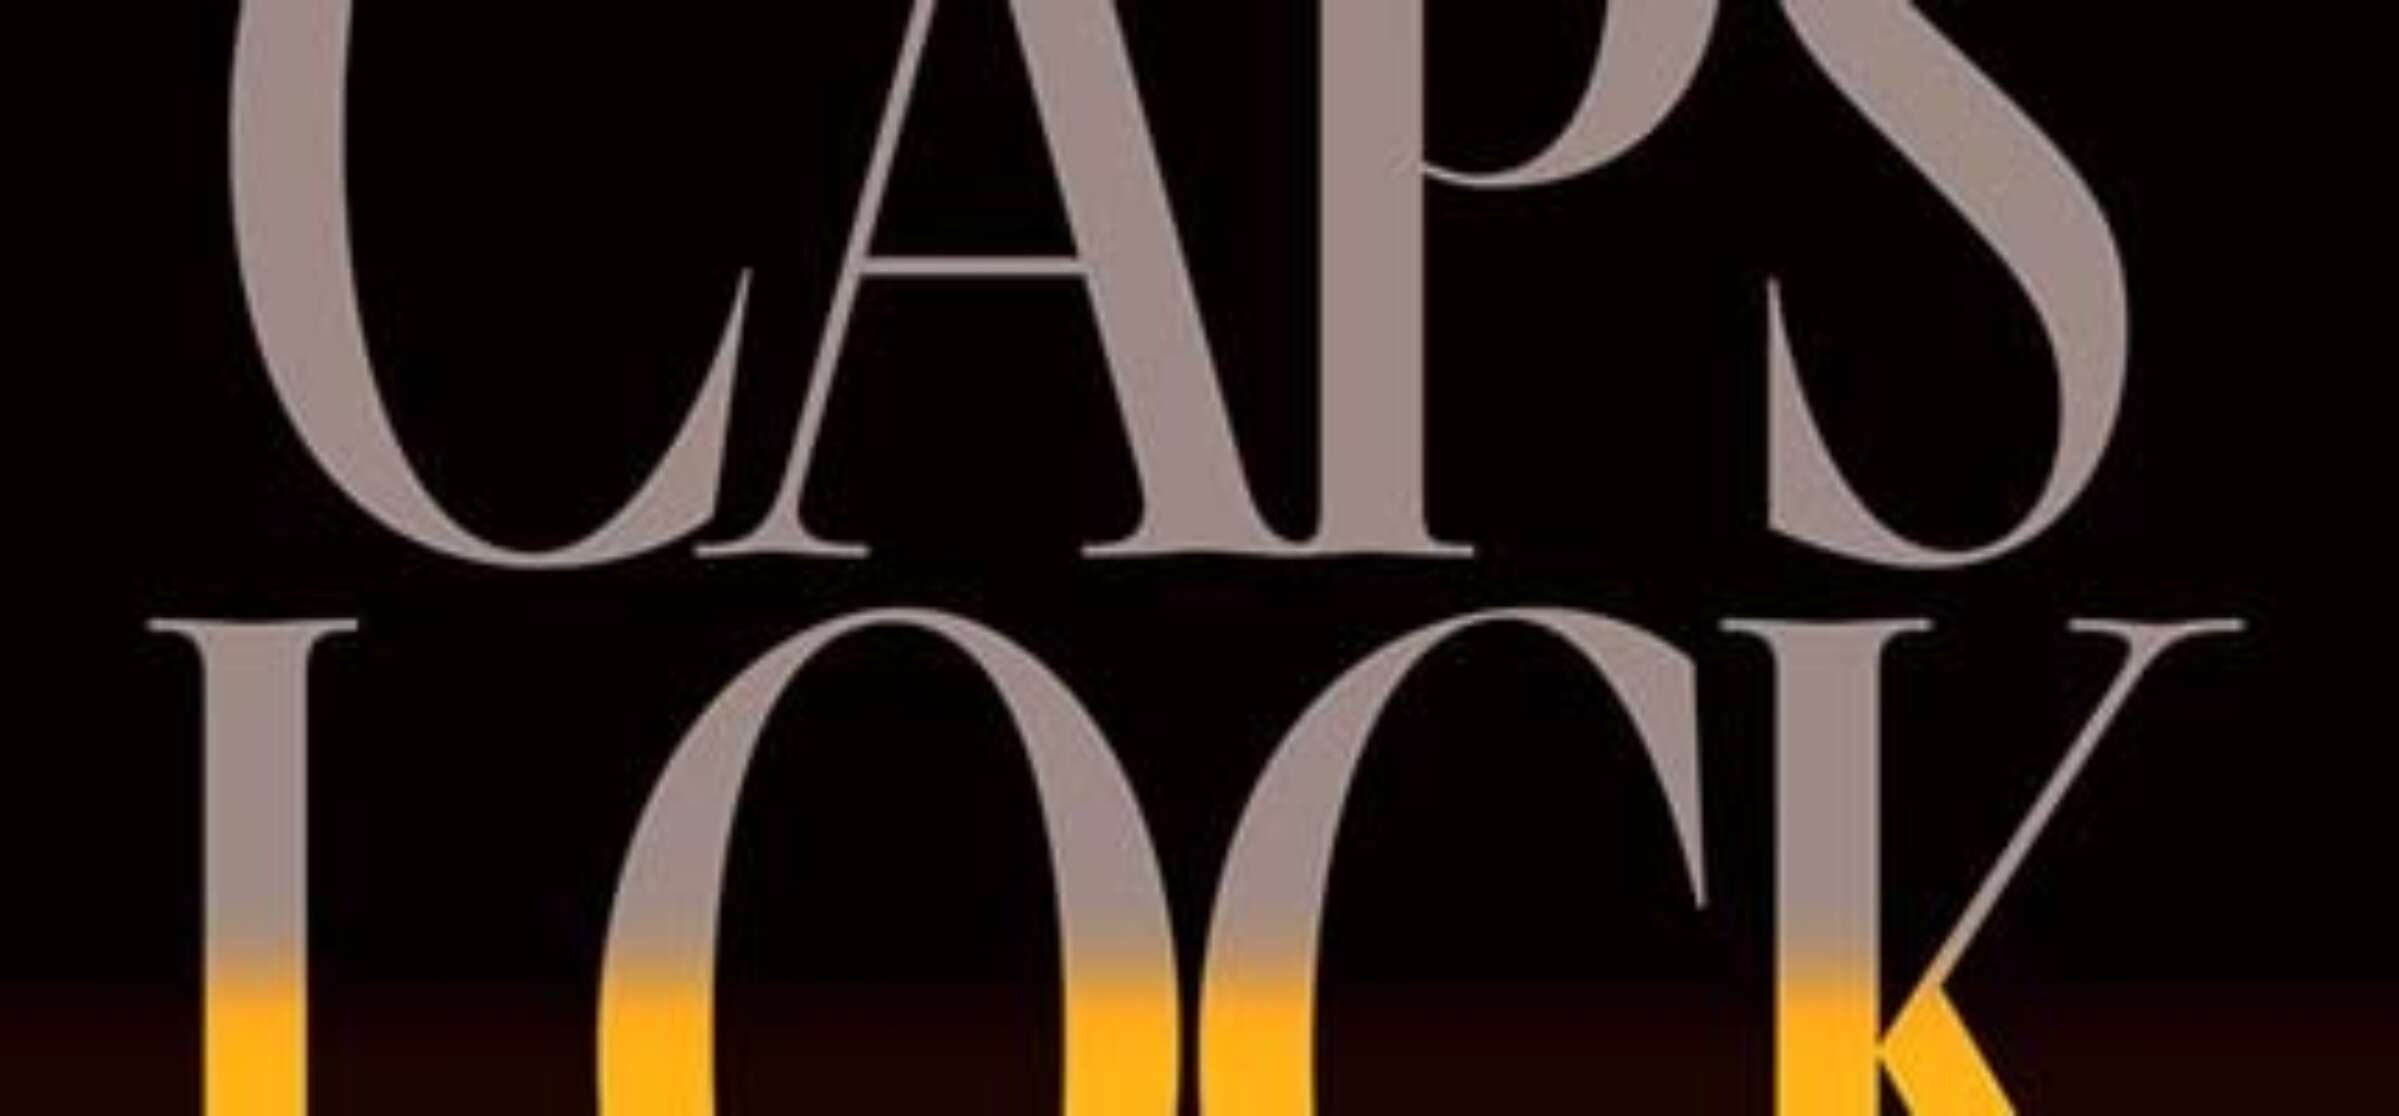 The image has the text "CAPS LOCK" in a large, elegant serif font against a black background with a gradient of warm colors at the bottom.